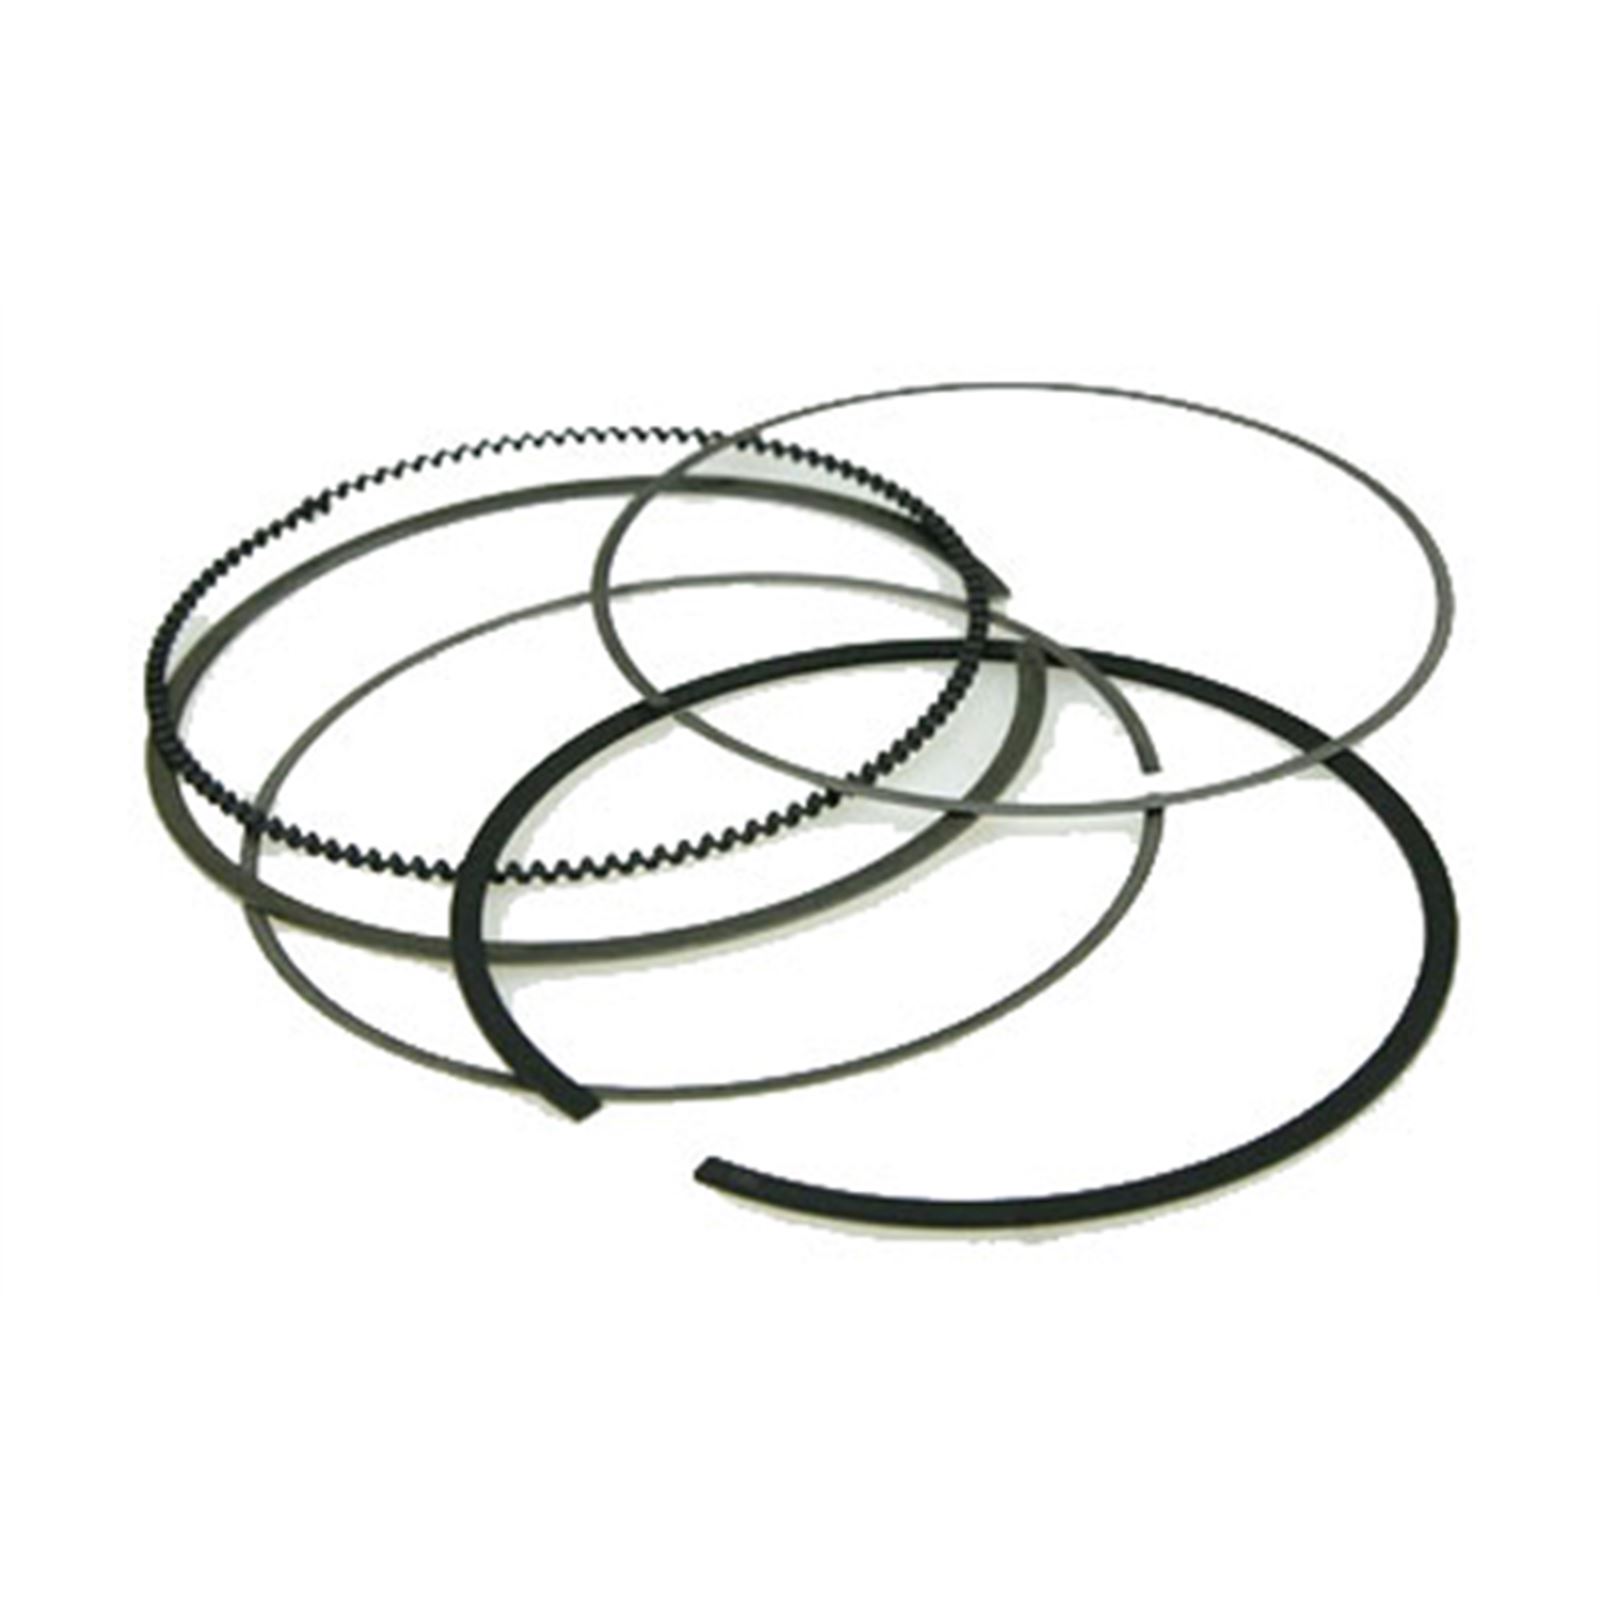 Cylinder Works Piston Rings